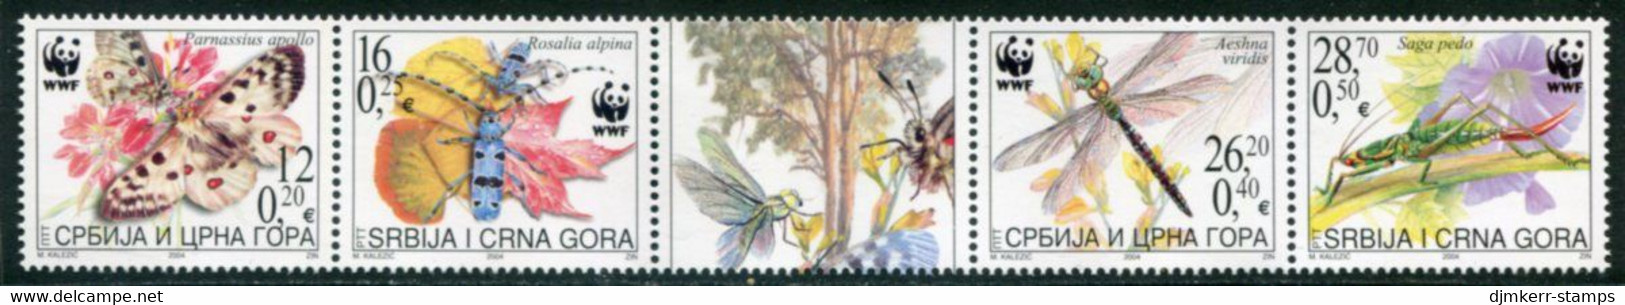 YUGOSLAVIA (Serbia & Montenegro) 2004 WWF: Insects MNH / **  Michel 3173-76 - Unused Stamps